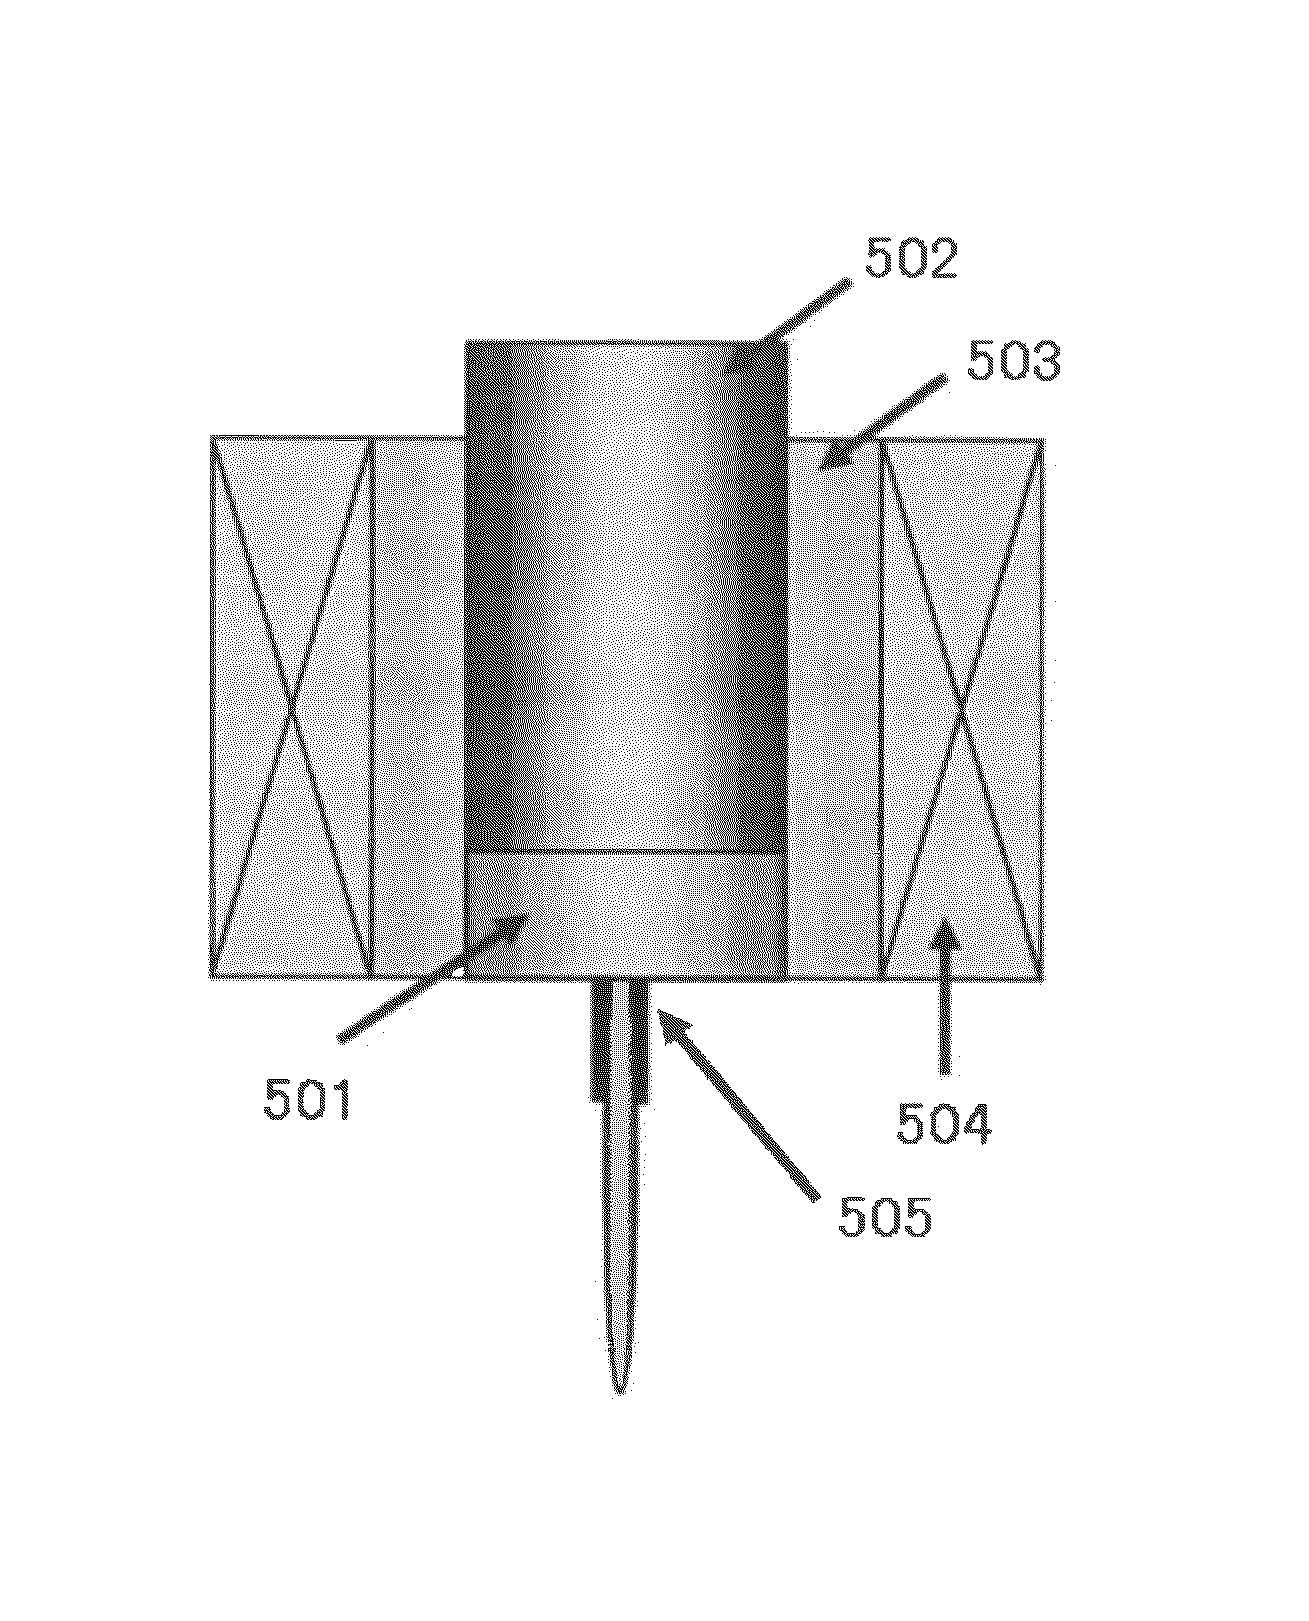 Toner, two component developer, process cartridge and color image forming apparatus